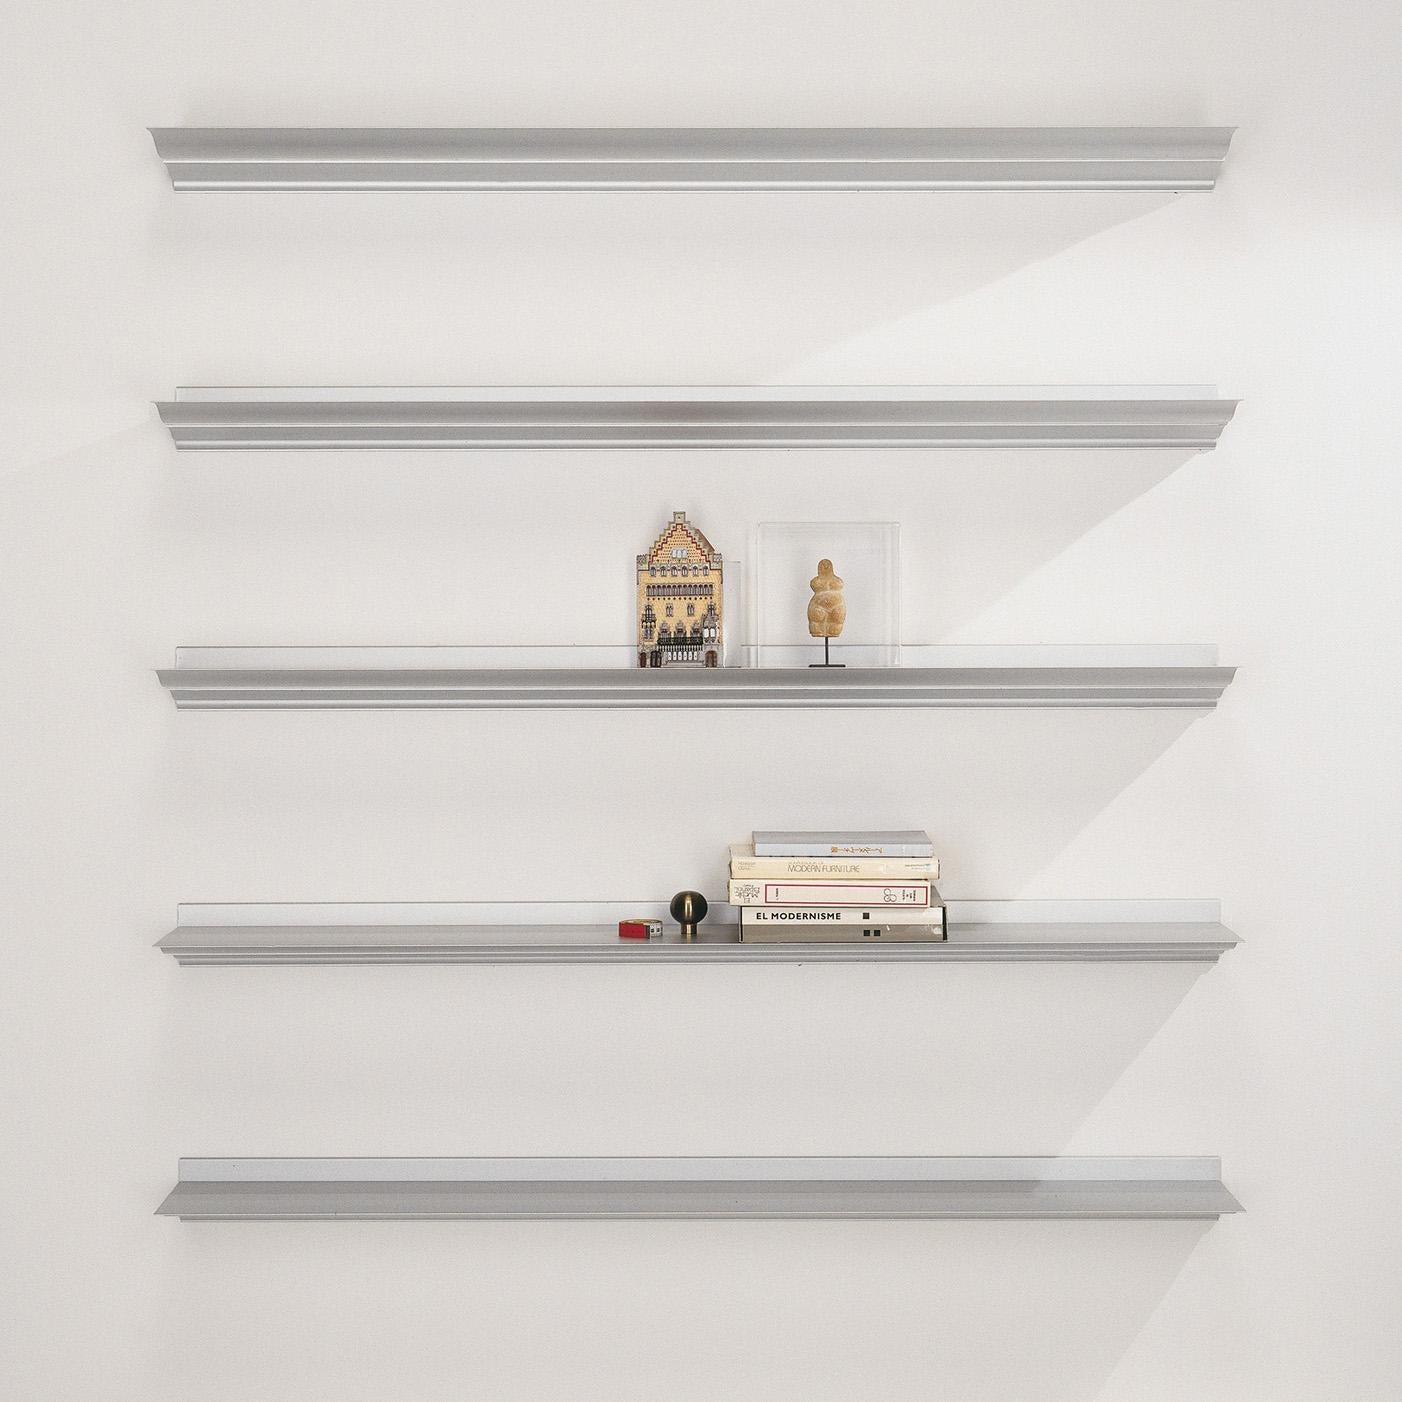 Shelve designed by Lluís Cloet and Oscar Tusquets in 1988 and manufactured by BD Barcelona.

Excellent example of the application of a material and modern manufacturing technique, that of extruded aluminium, to a historicist and decorative